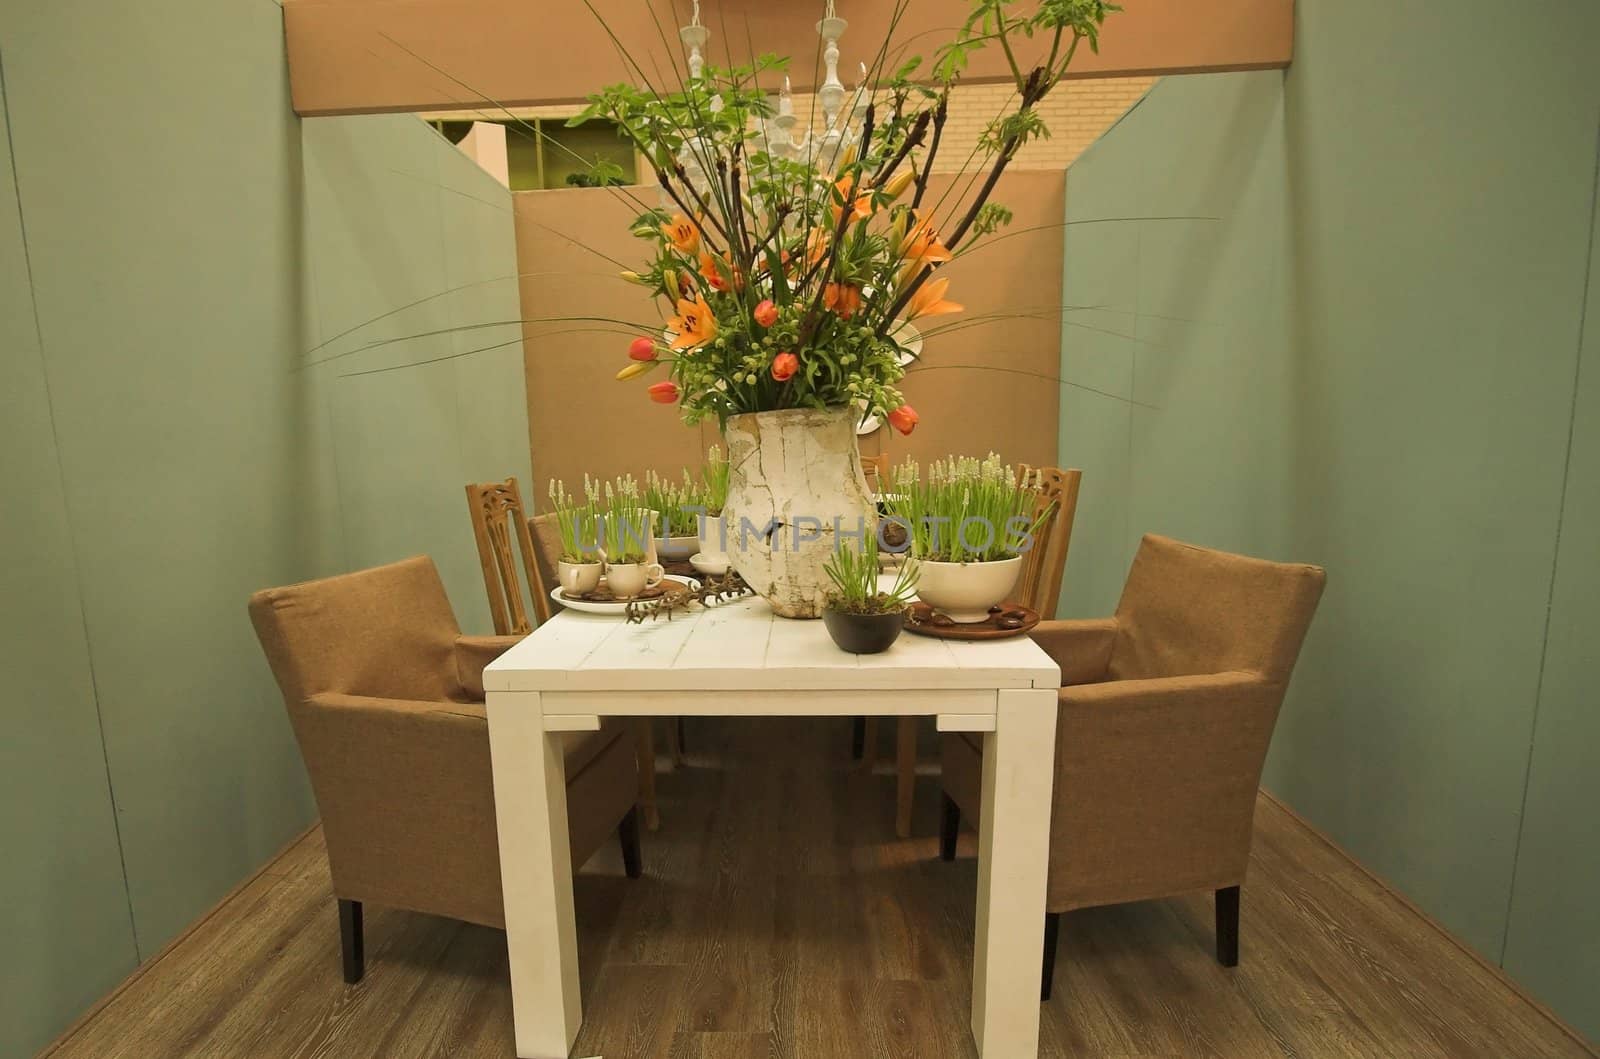 Modern dining room arranged with flowers in various colors